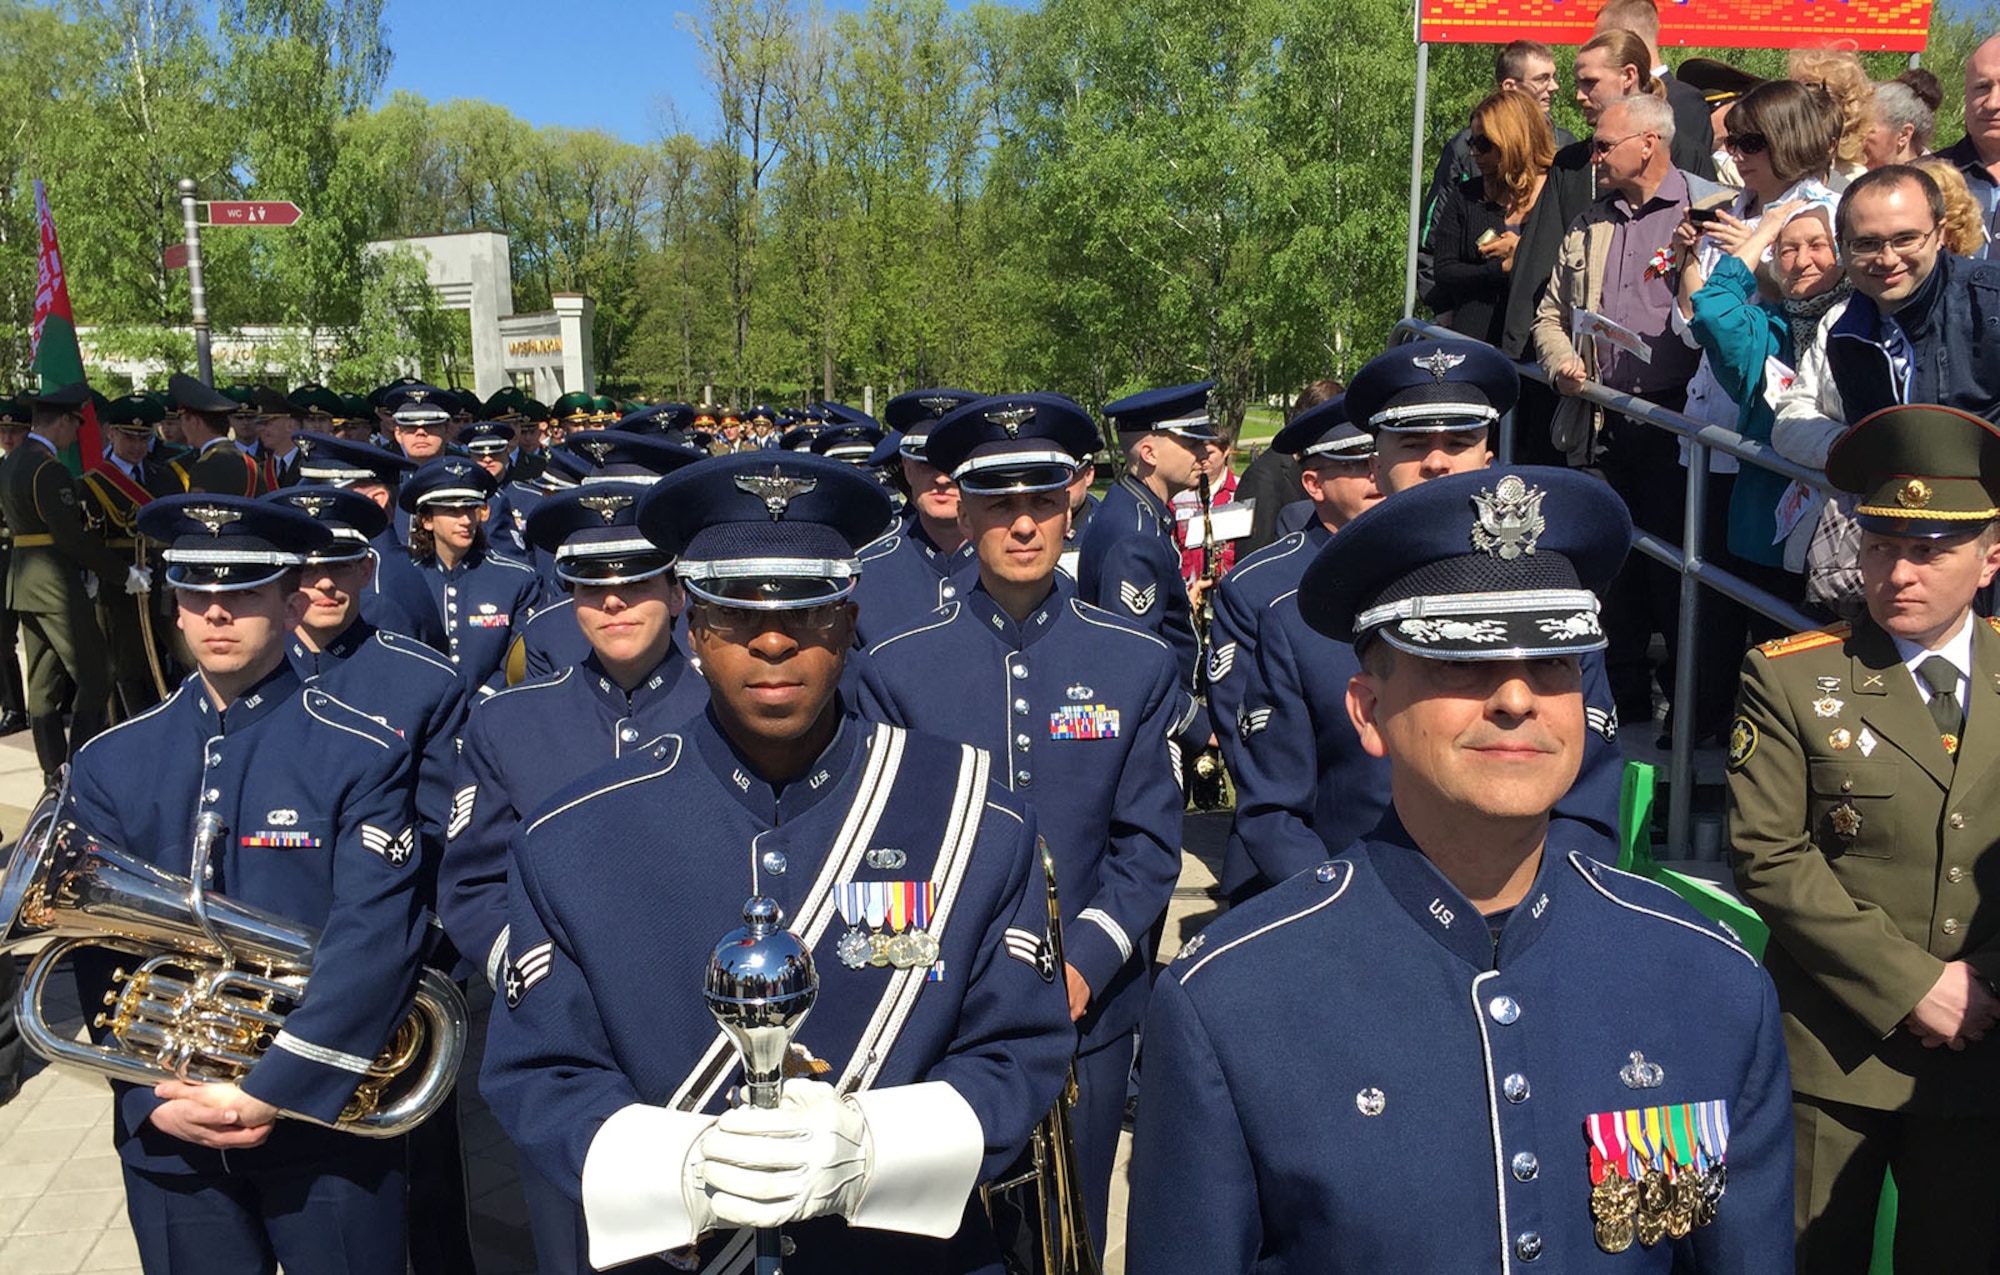 MINSK, BELARUS -- Led by U.S. Air Force Lt. Col. Mike Mench, U.S. Air Forces 
in Europe Band commander, and Staff Sgt. Chris Jackson, USAFE Band drum major, 
the USAFE Band gather at a staging point before marching in the World War II 
Victory Day Parade May 9, 2015, in Minsk, Belarus. The band's participation 
was the first time in Belarus' history that participants from the U.S. 
Department of Defense marched in the parade to commemorate the sacrifices of 
the World War II Allies and the end of hostilities 70 years ago. In addition 
to their participation in the Victory Day parade, which included more than 
5,000 Belarussian soldiers and 250 military vehicles, the 34 USAFE bandsmen 
performed concerts in Brest and Minsk, Belarus. (U.S. Air Force photo by 
Master Sgt. Brian Bahret)
